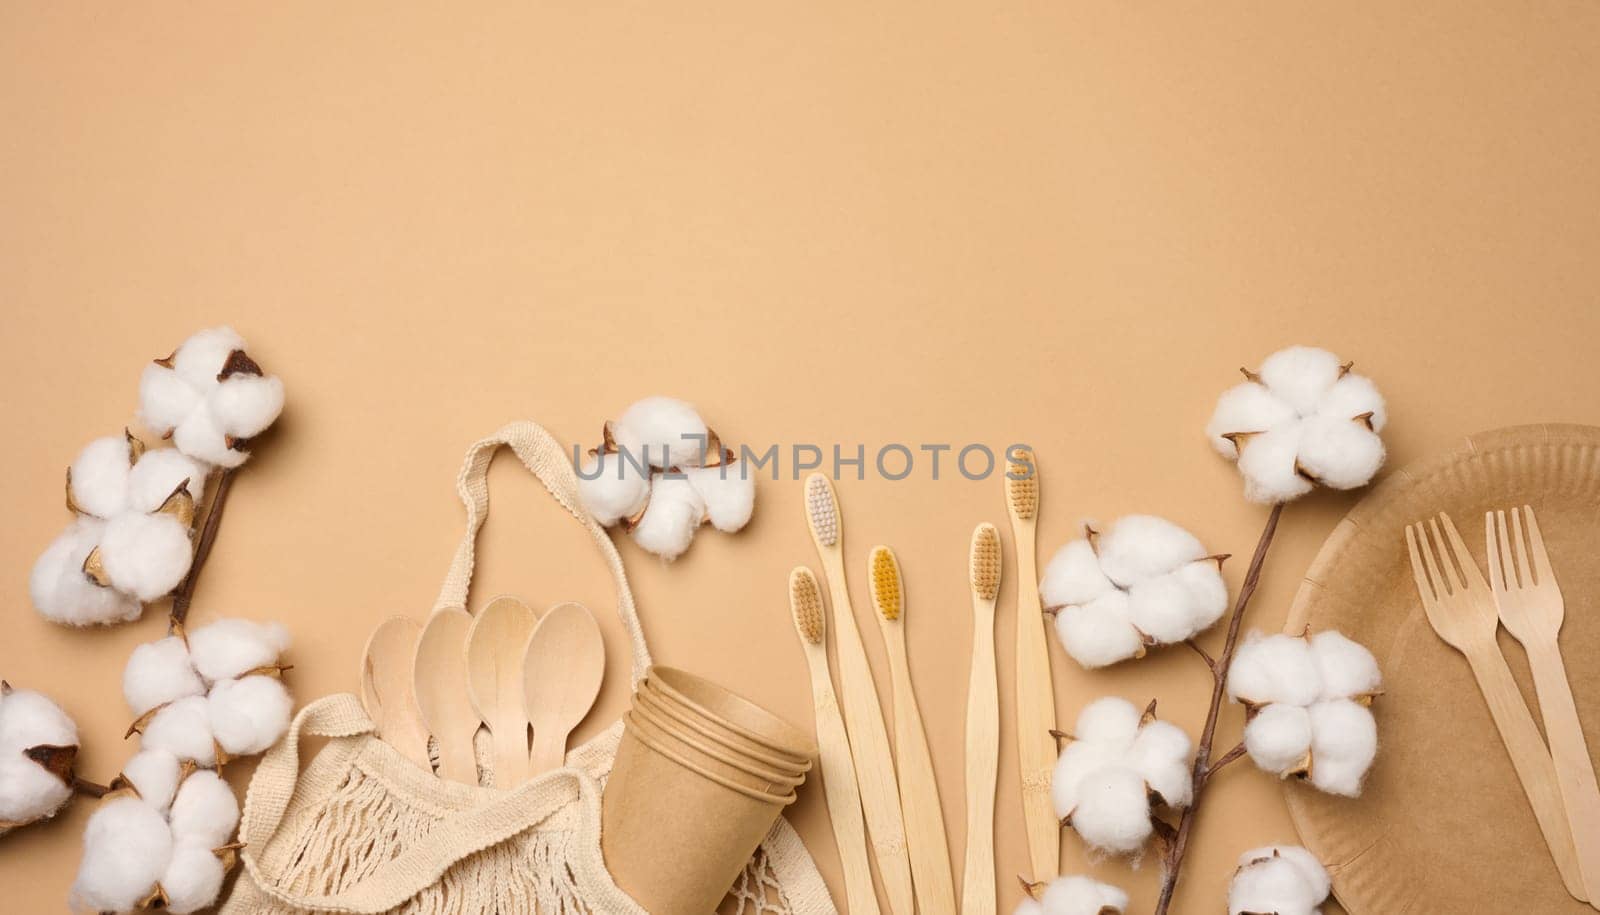 Cotton bag, wooden spoon, plates and cups on a brown background. Waste recycling concept, zero waste